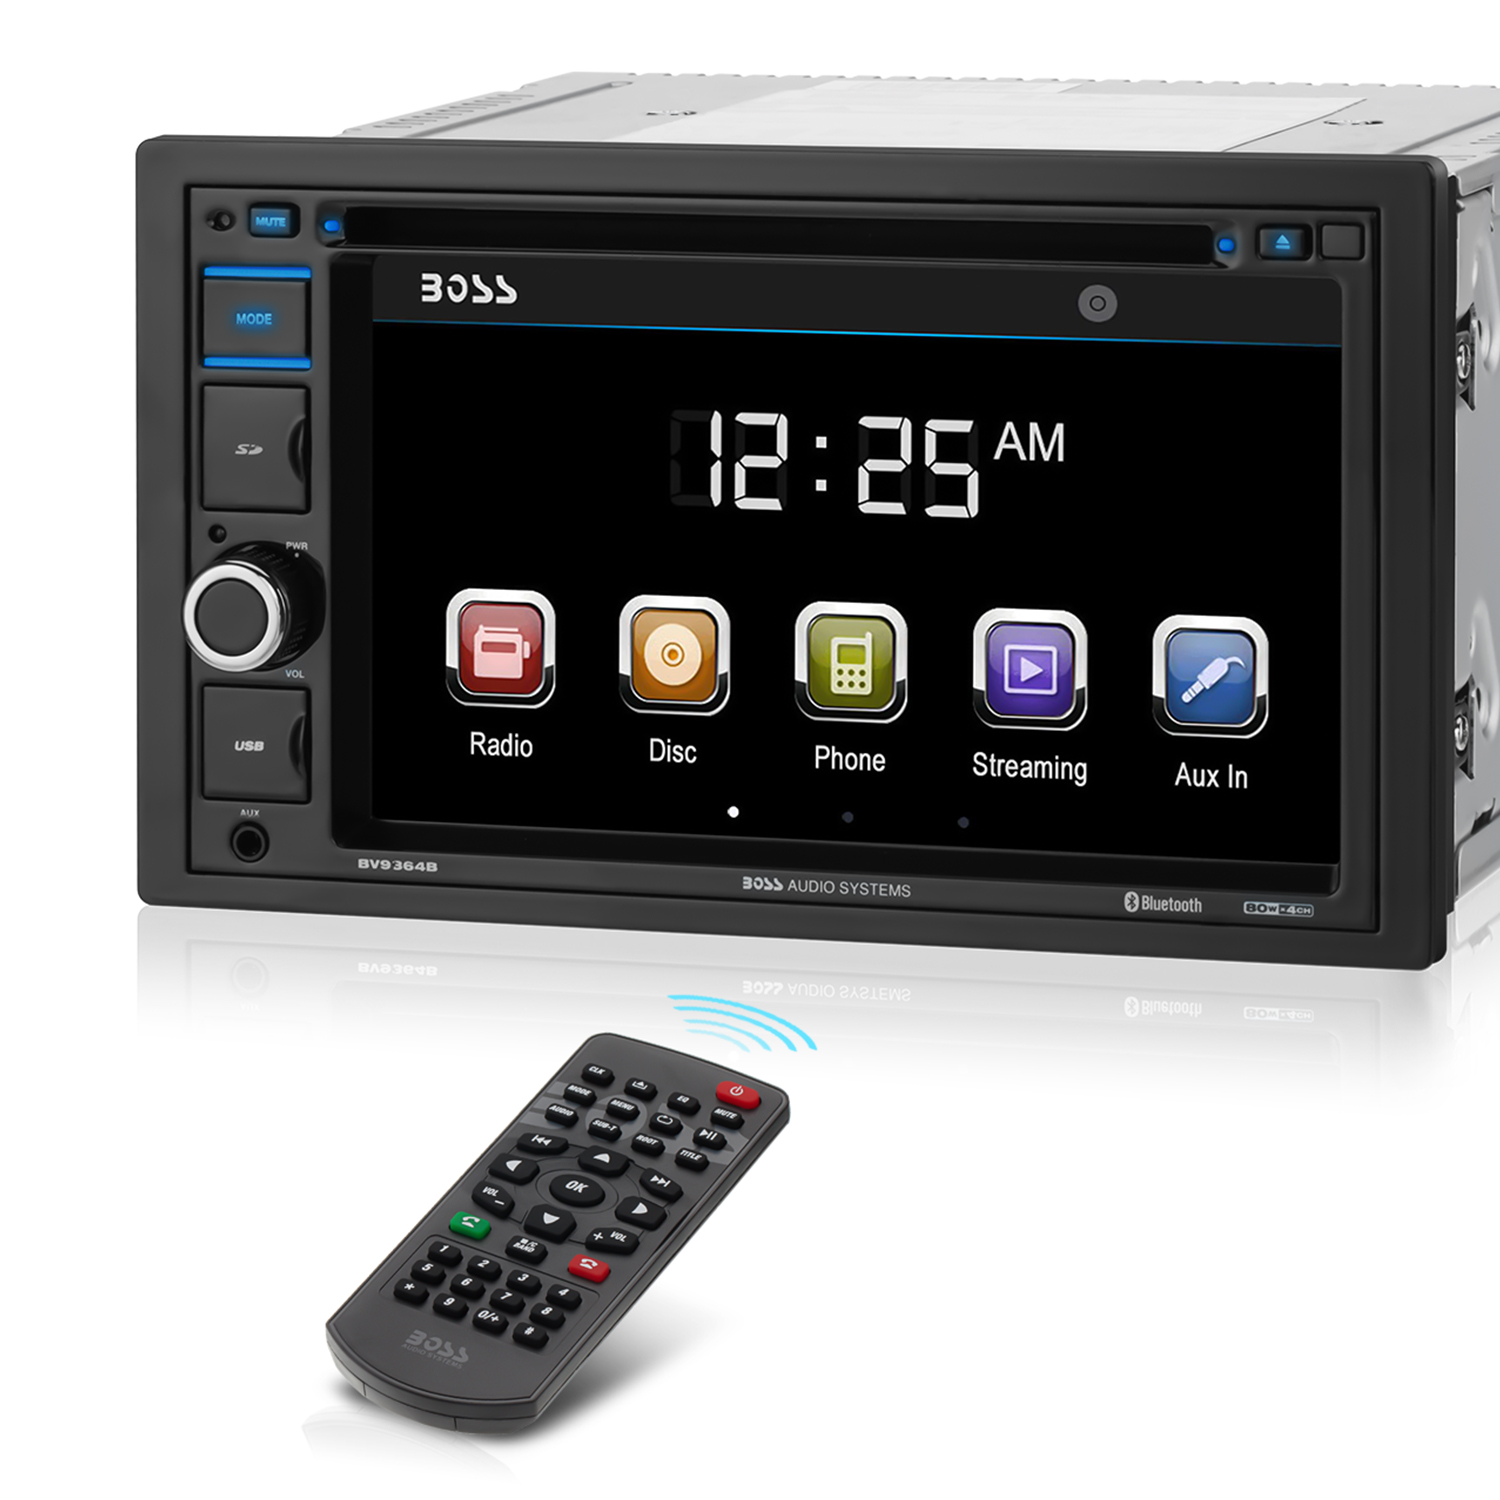 Boss Audio Systems BV9364B Car Stereo System – 6.2 inch Double Din,  Touchscreen LCD, Bluetooth Audio and Calling Head Unit, Aux-in, USB, SD, CD  Player, AM/FM Radio Receiver, Hook up to Amplifier